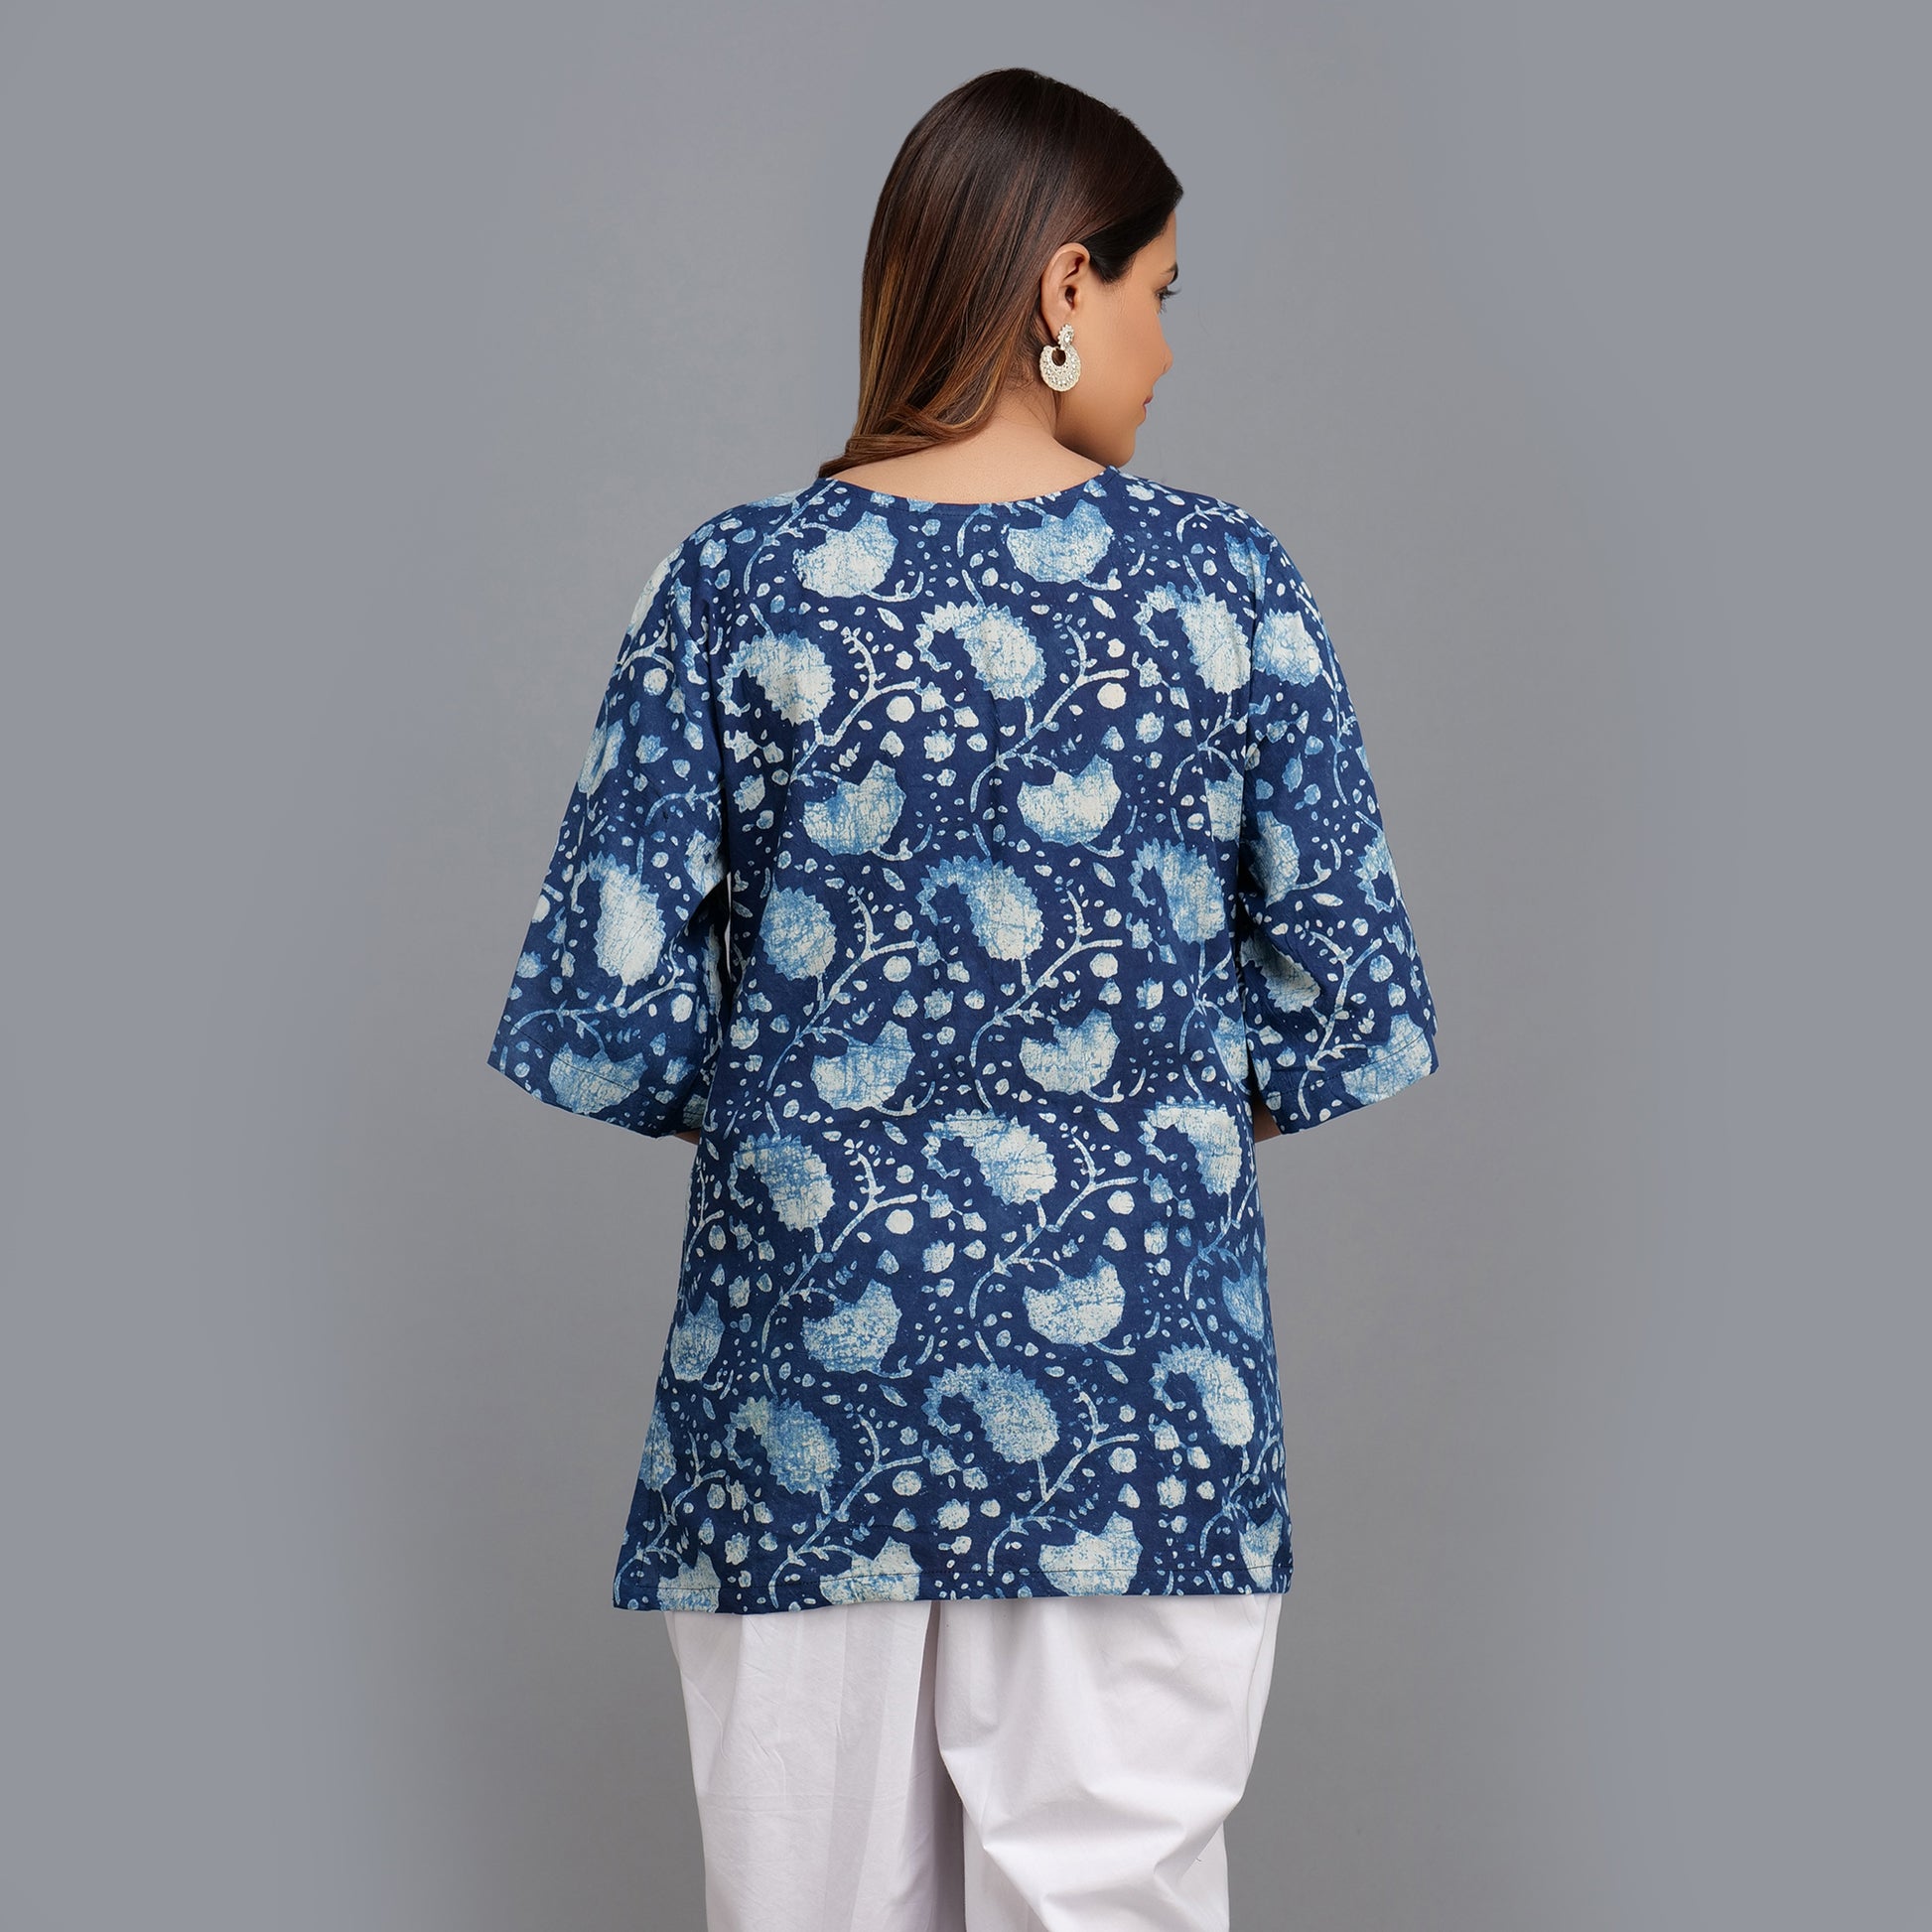 Blue Printed High Low Top for Women